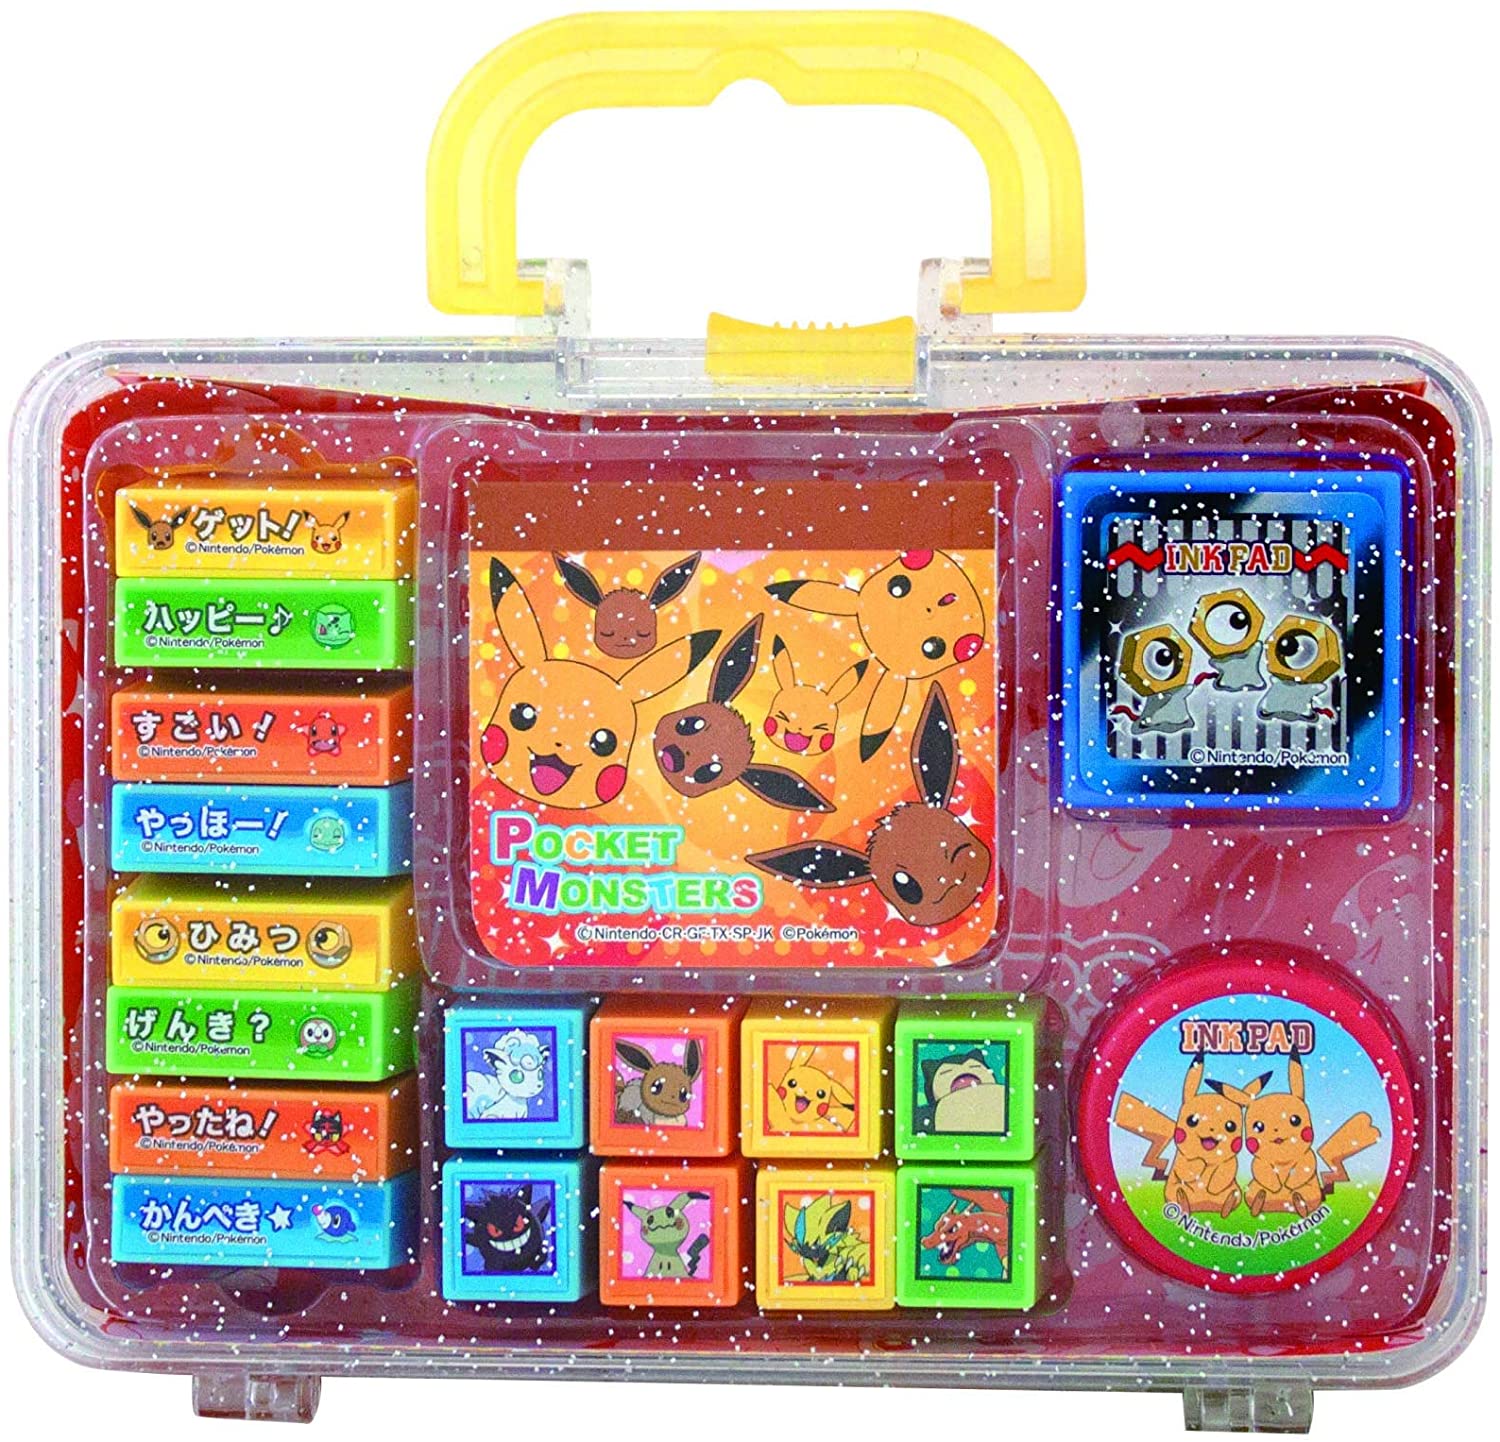 Marusho Pok-mon Mini Stamp Set, 16 Stamps, 2 Stamp Stands, 1 Notepad